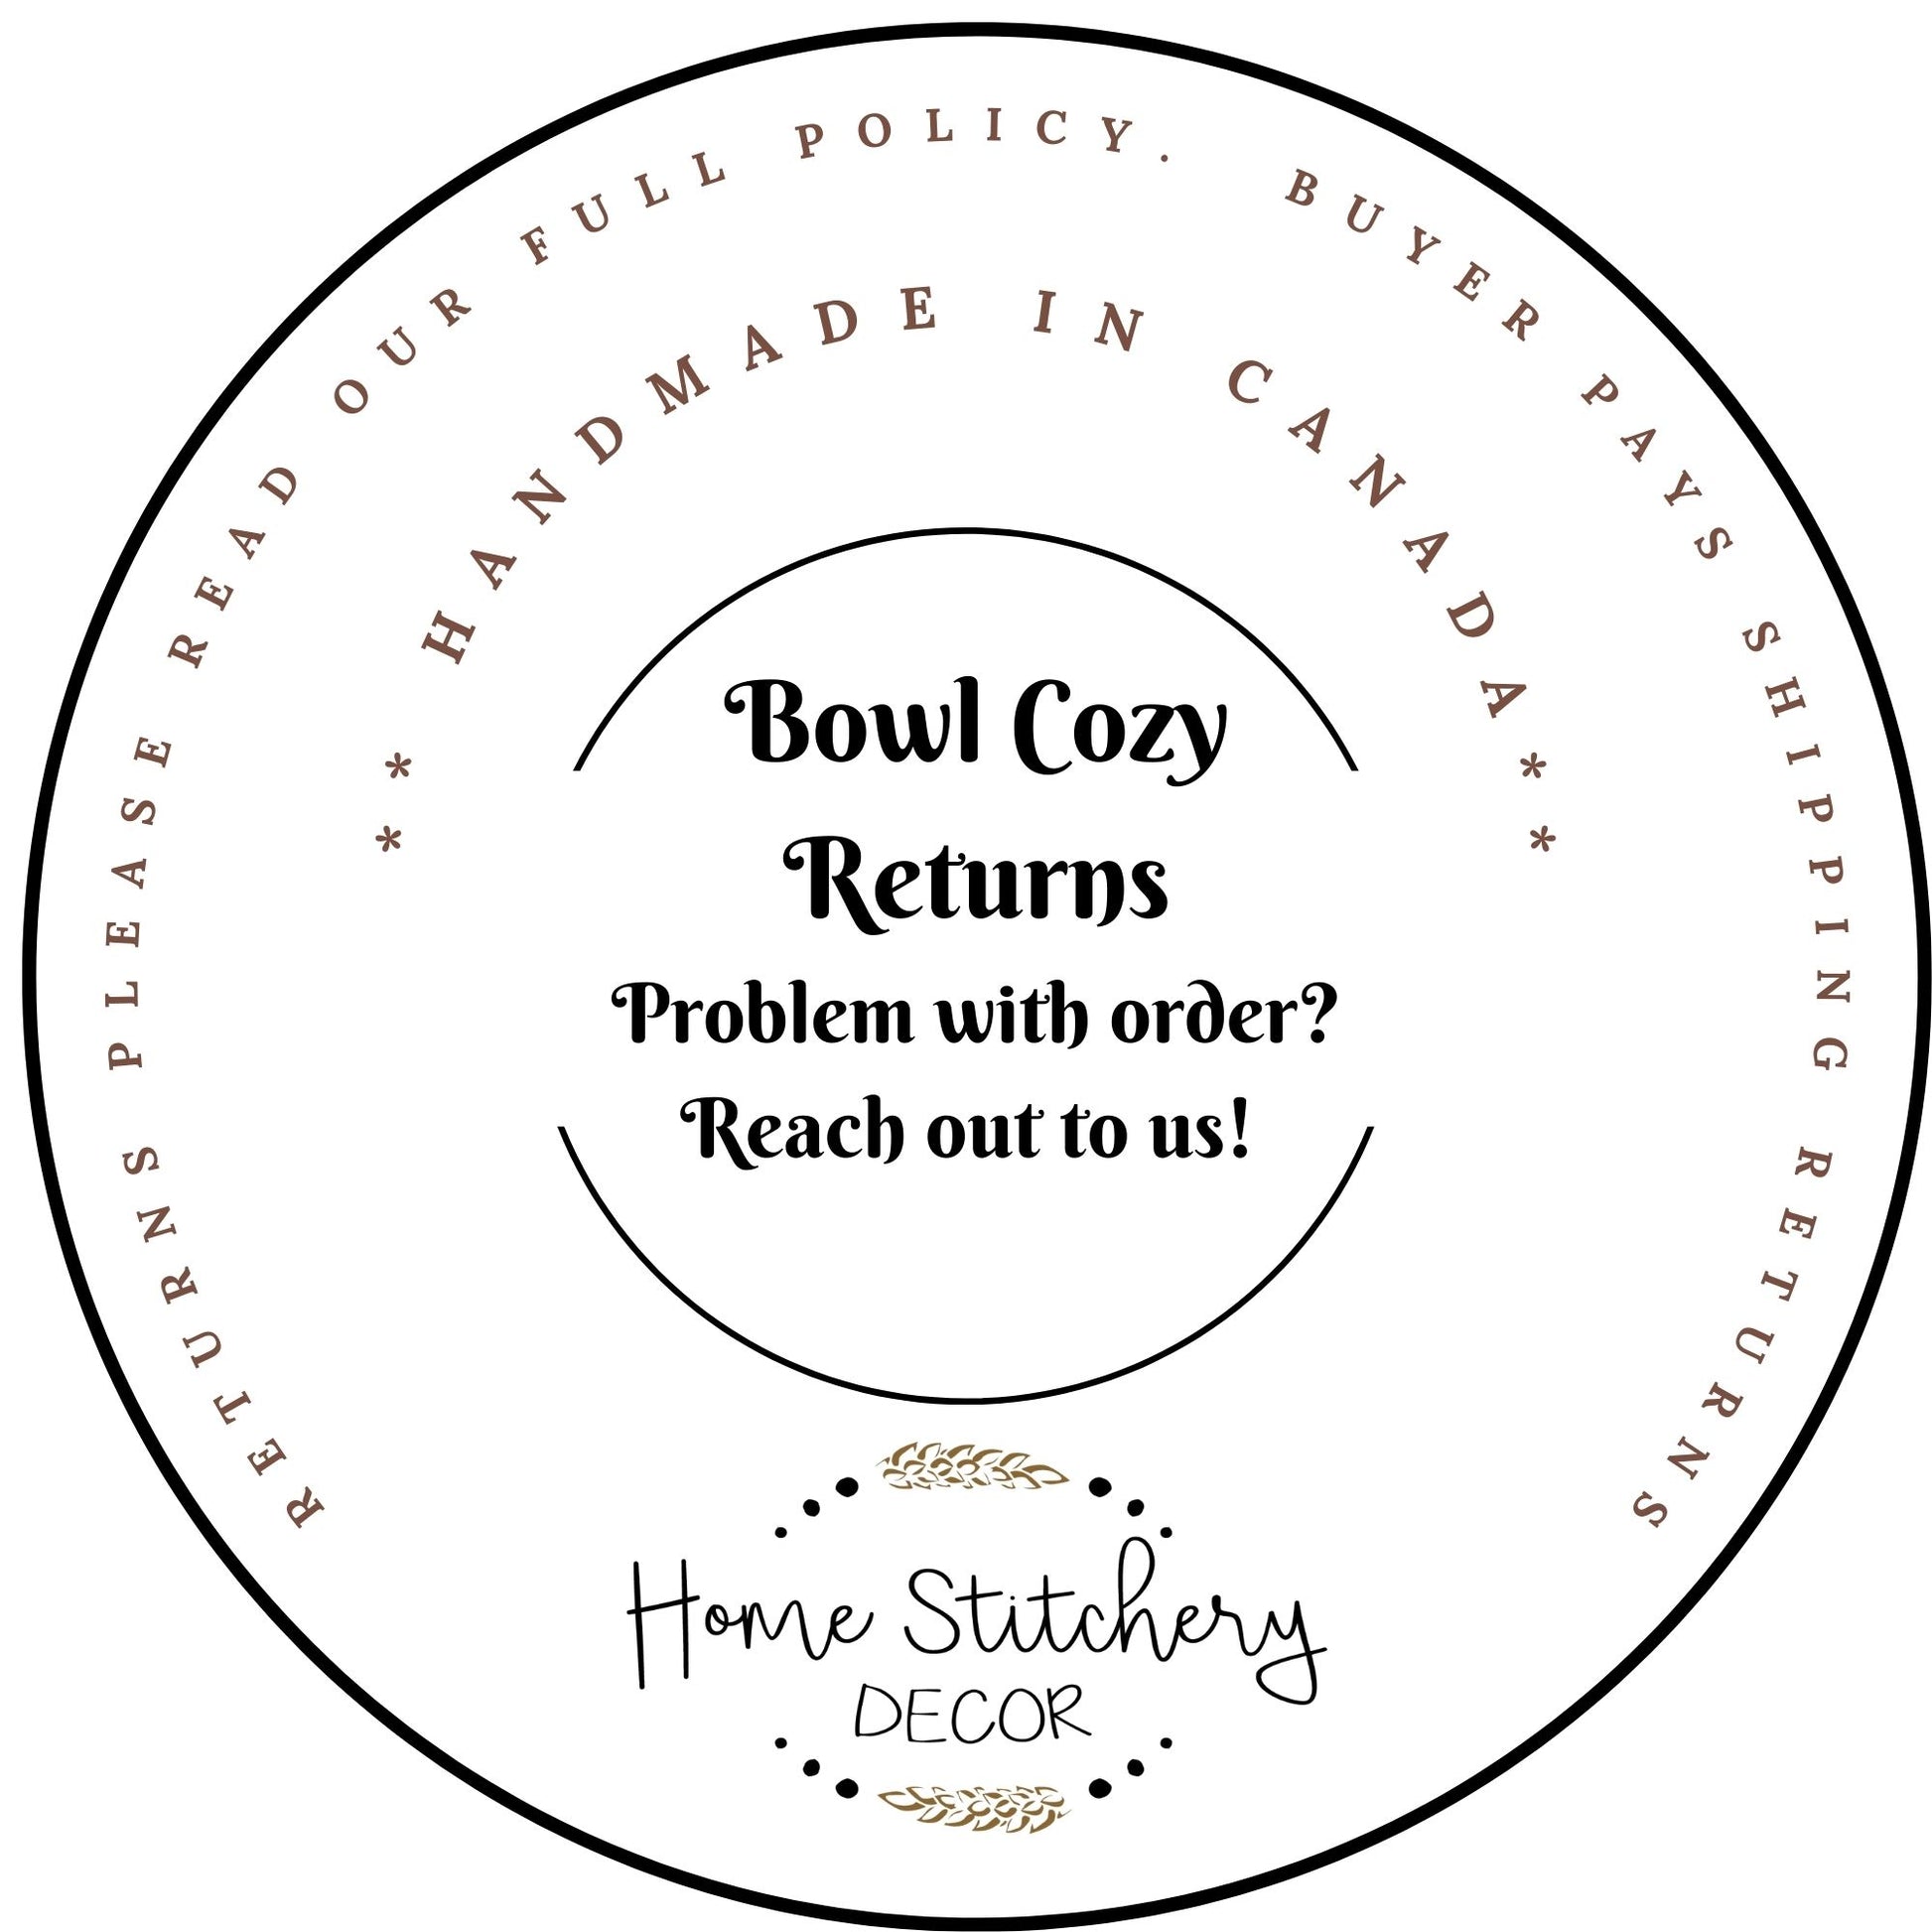 Soup bowl cozy return policy. Buyer pays return shipping. Handmade in Canada by Home Stitchery Decor. If there is an issue with your Soup Bowl Cozy order please reach out so we can help. Home Stitchery Decor